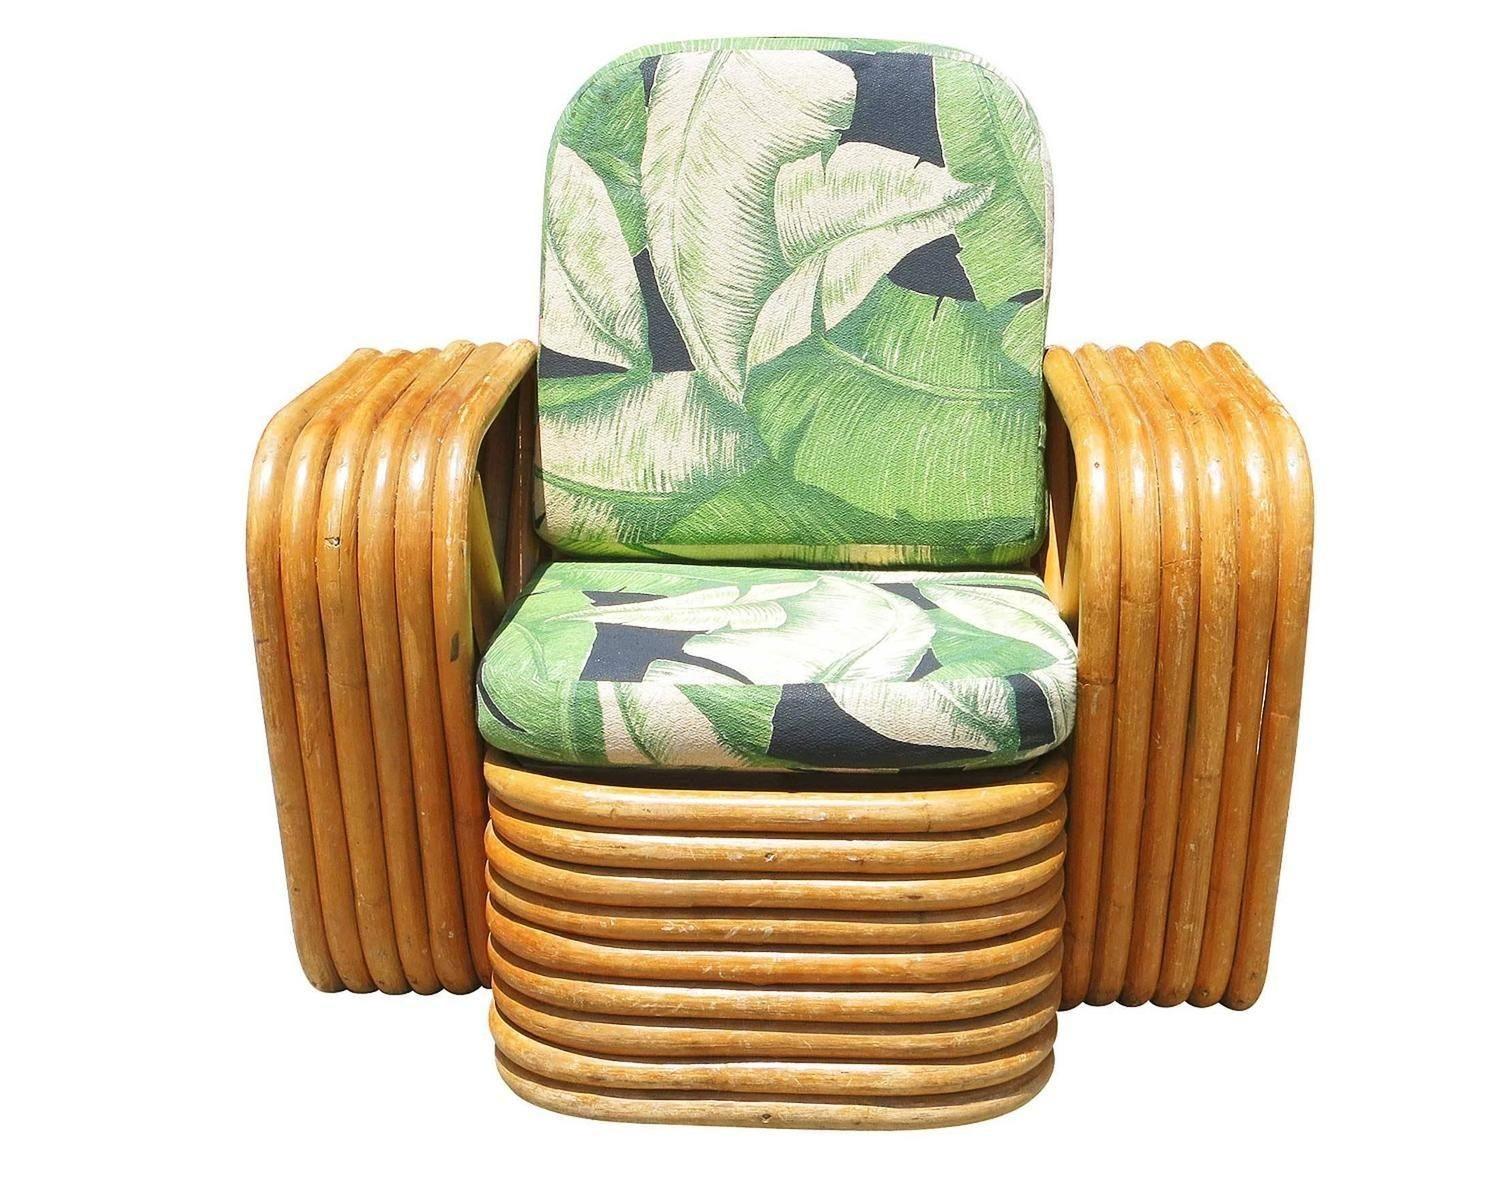 Offered is a children's size lounge chair designed by Paul Franki. This chair features six-strand square pretzel arms with a classic stacked base.

All rattan, bamboo, and wicker have been painstakingly refurbished using the finest materials by